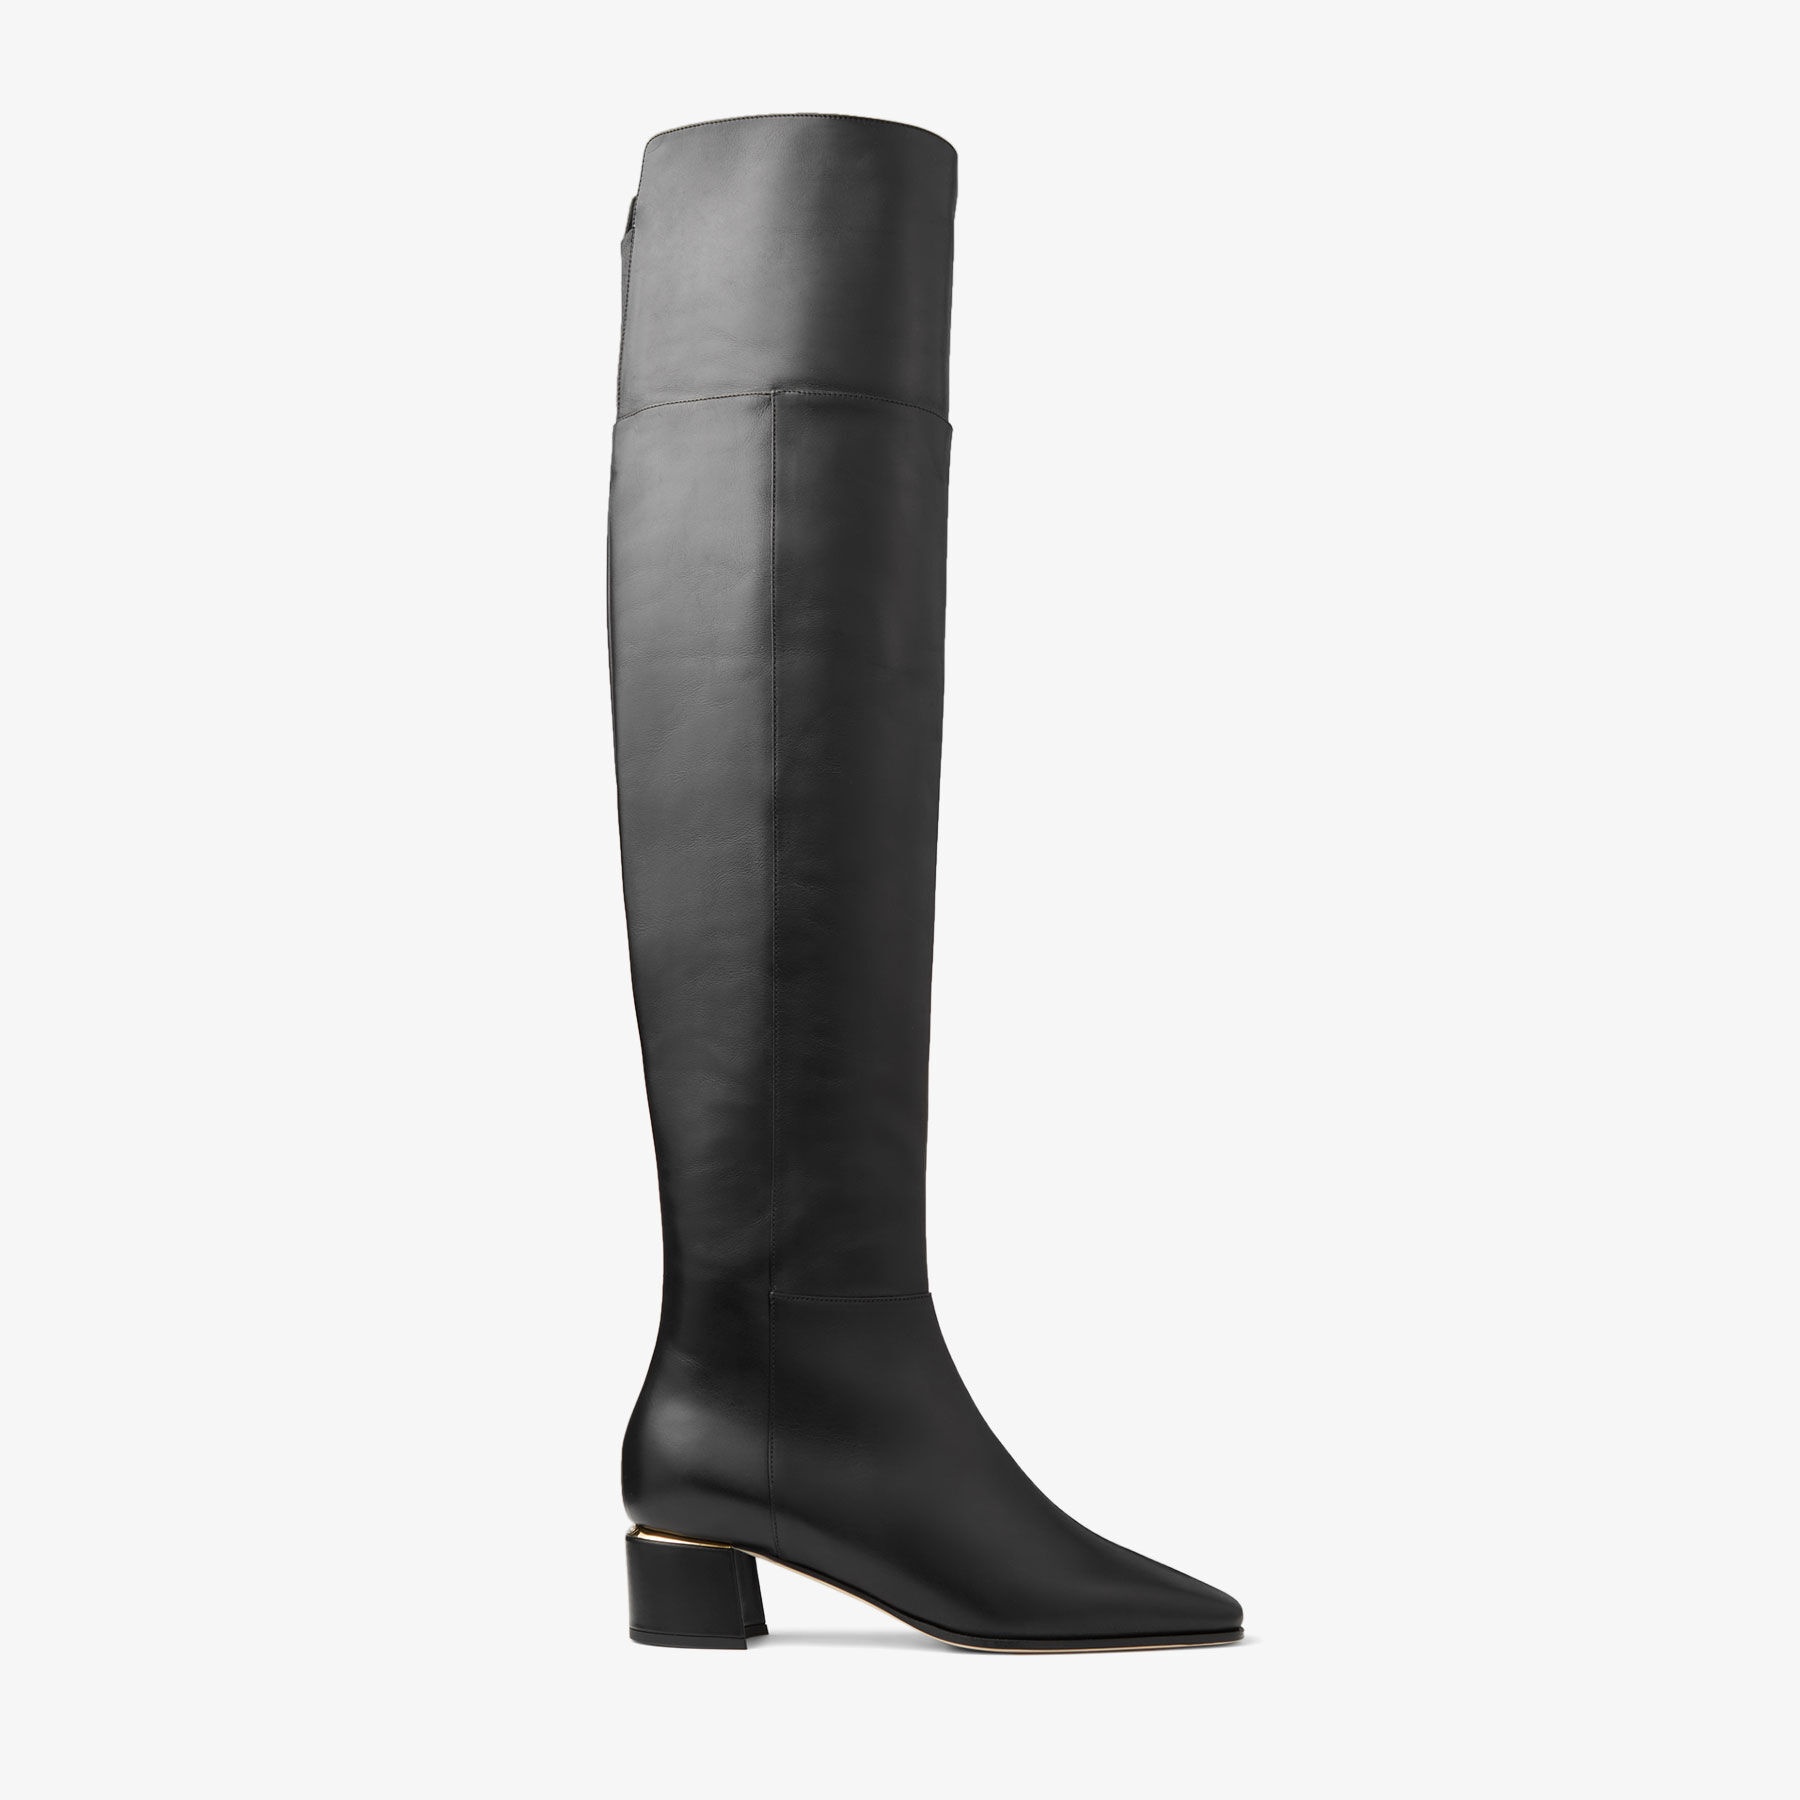 Loren Over The Knee 45
Black Calf Leather Over-The-Knee Boots - 1